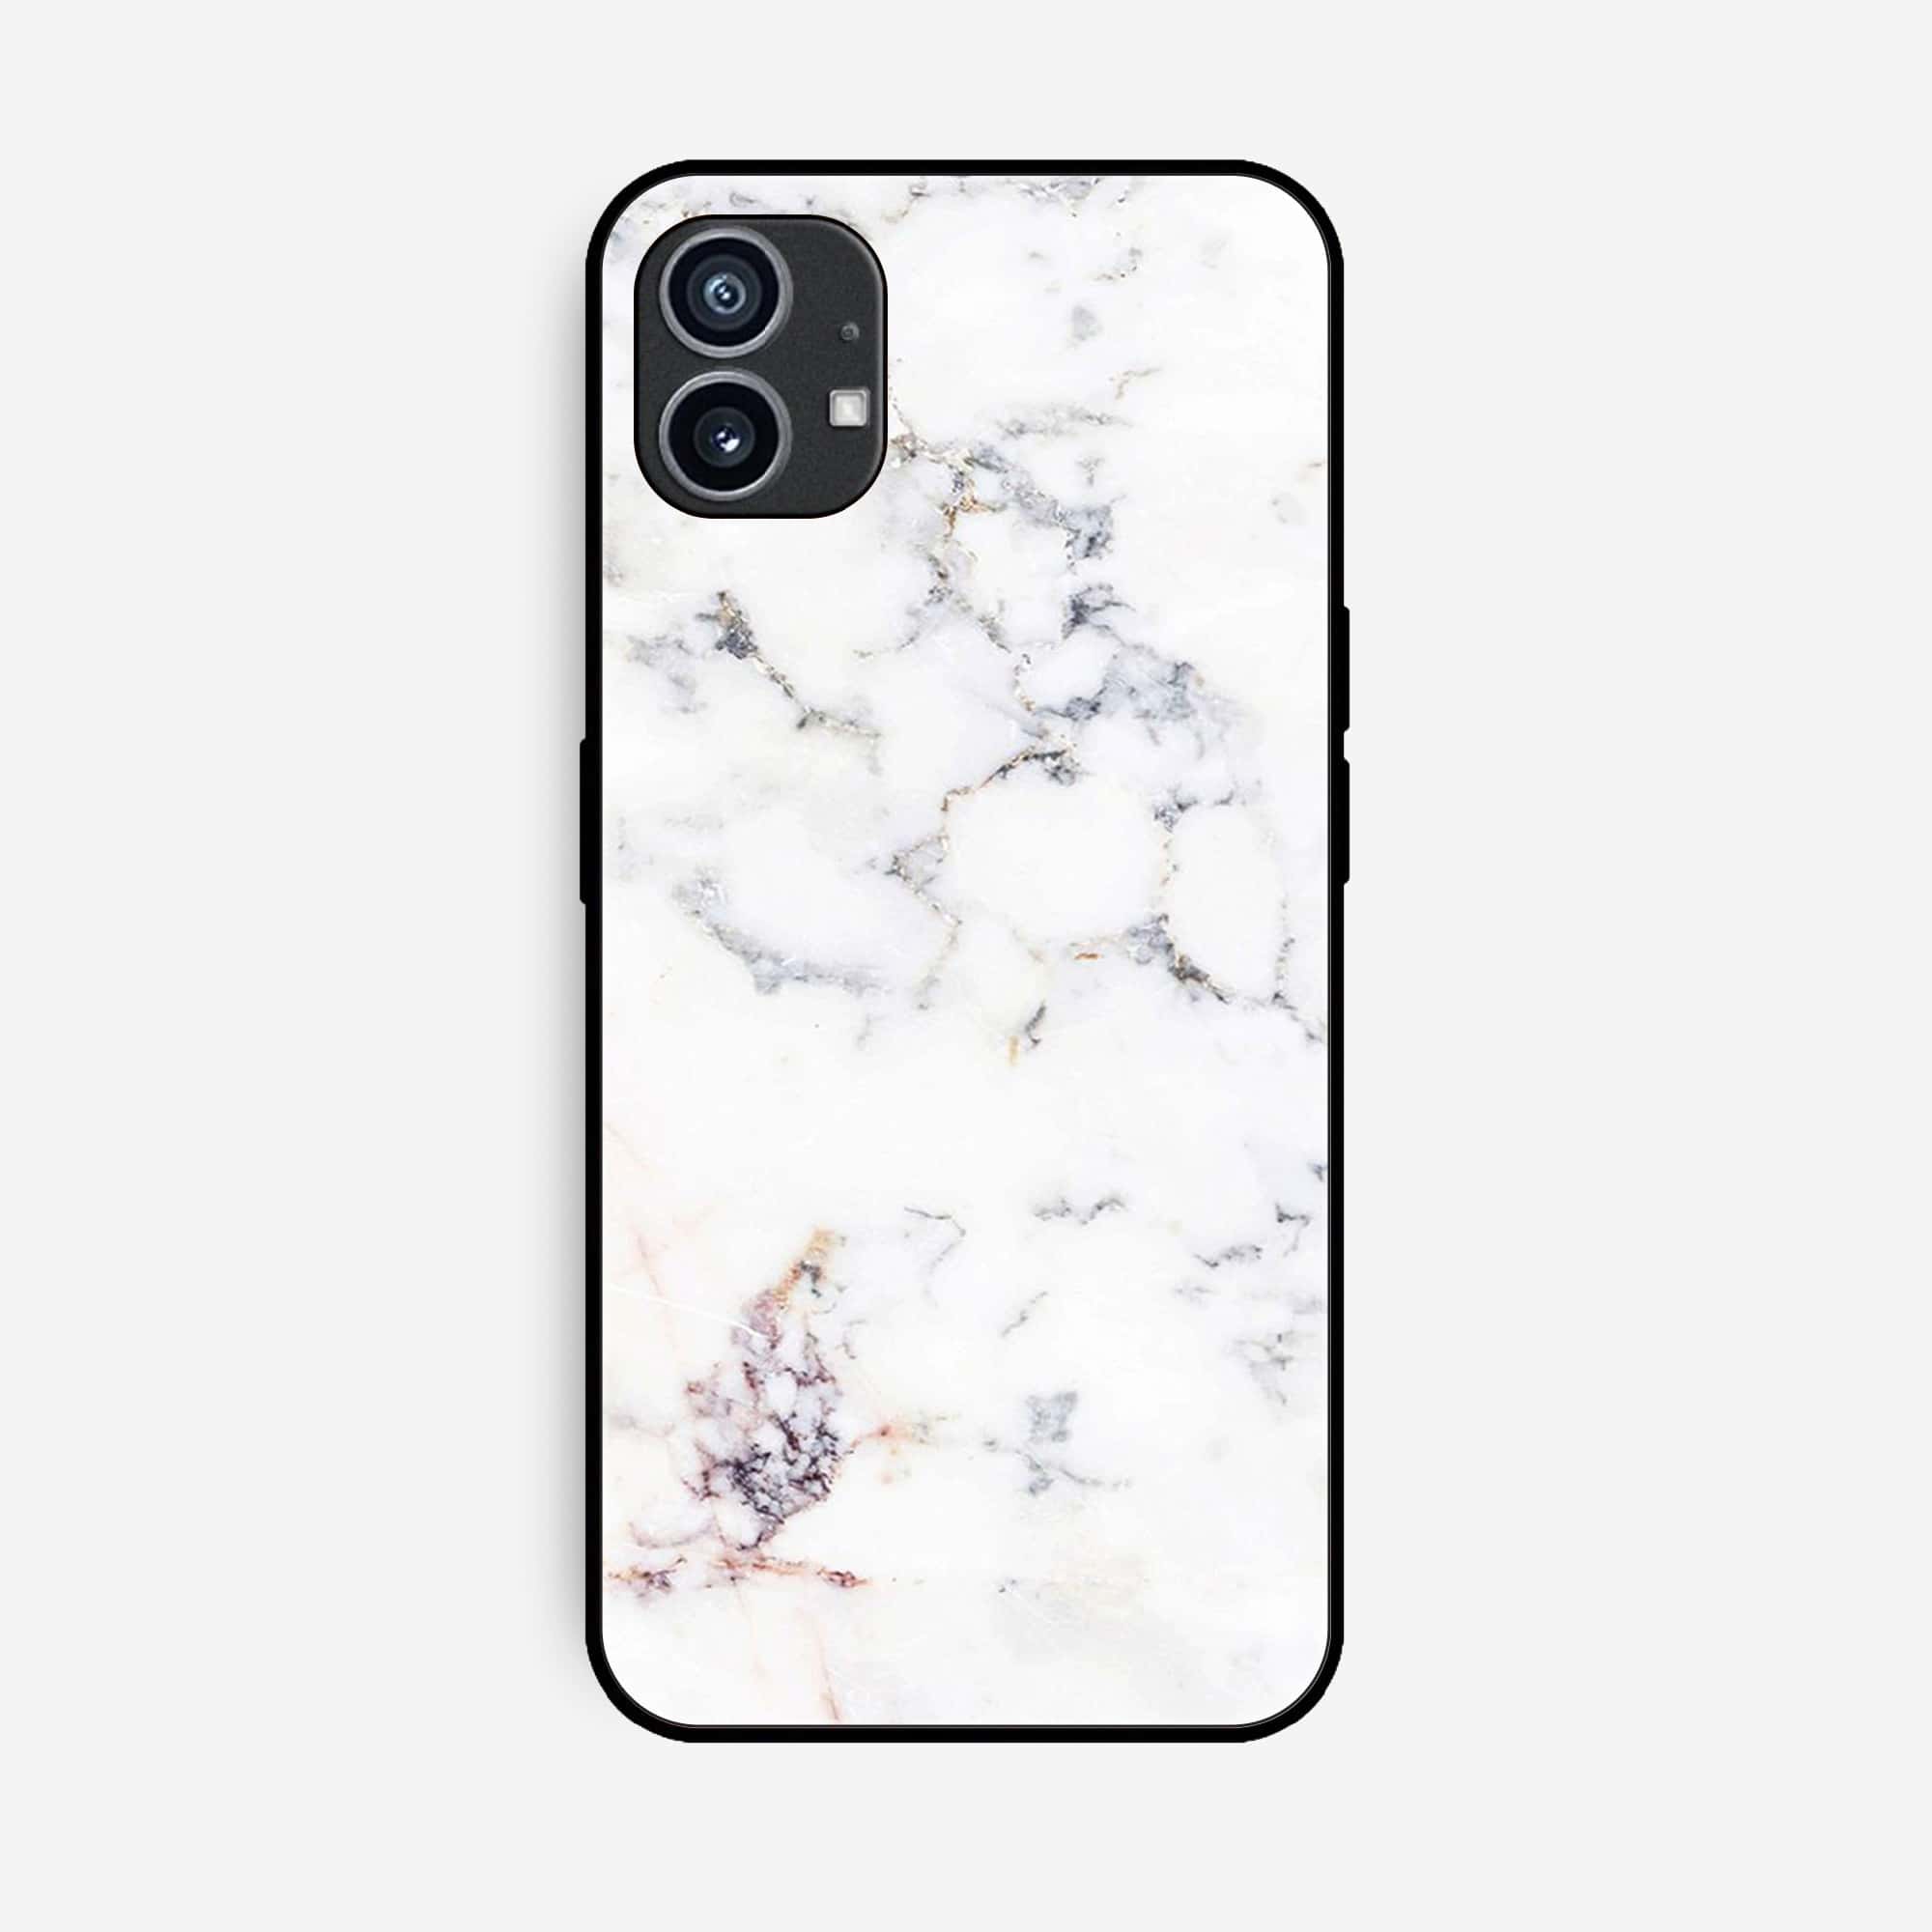 Nothing Phone (1)  White Marble Series Premium Printed Glass soft Bumper shock Proof Case